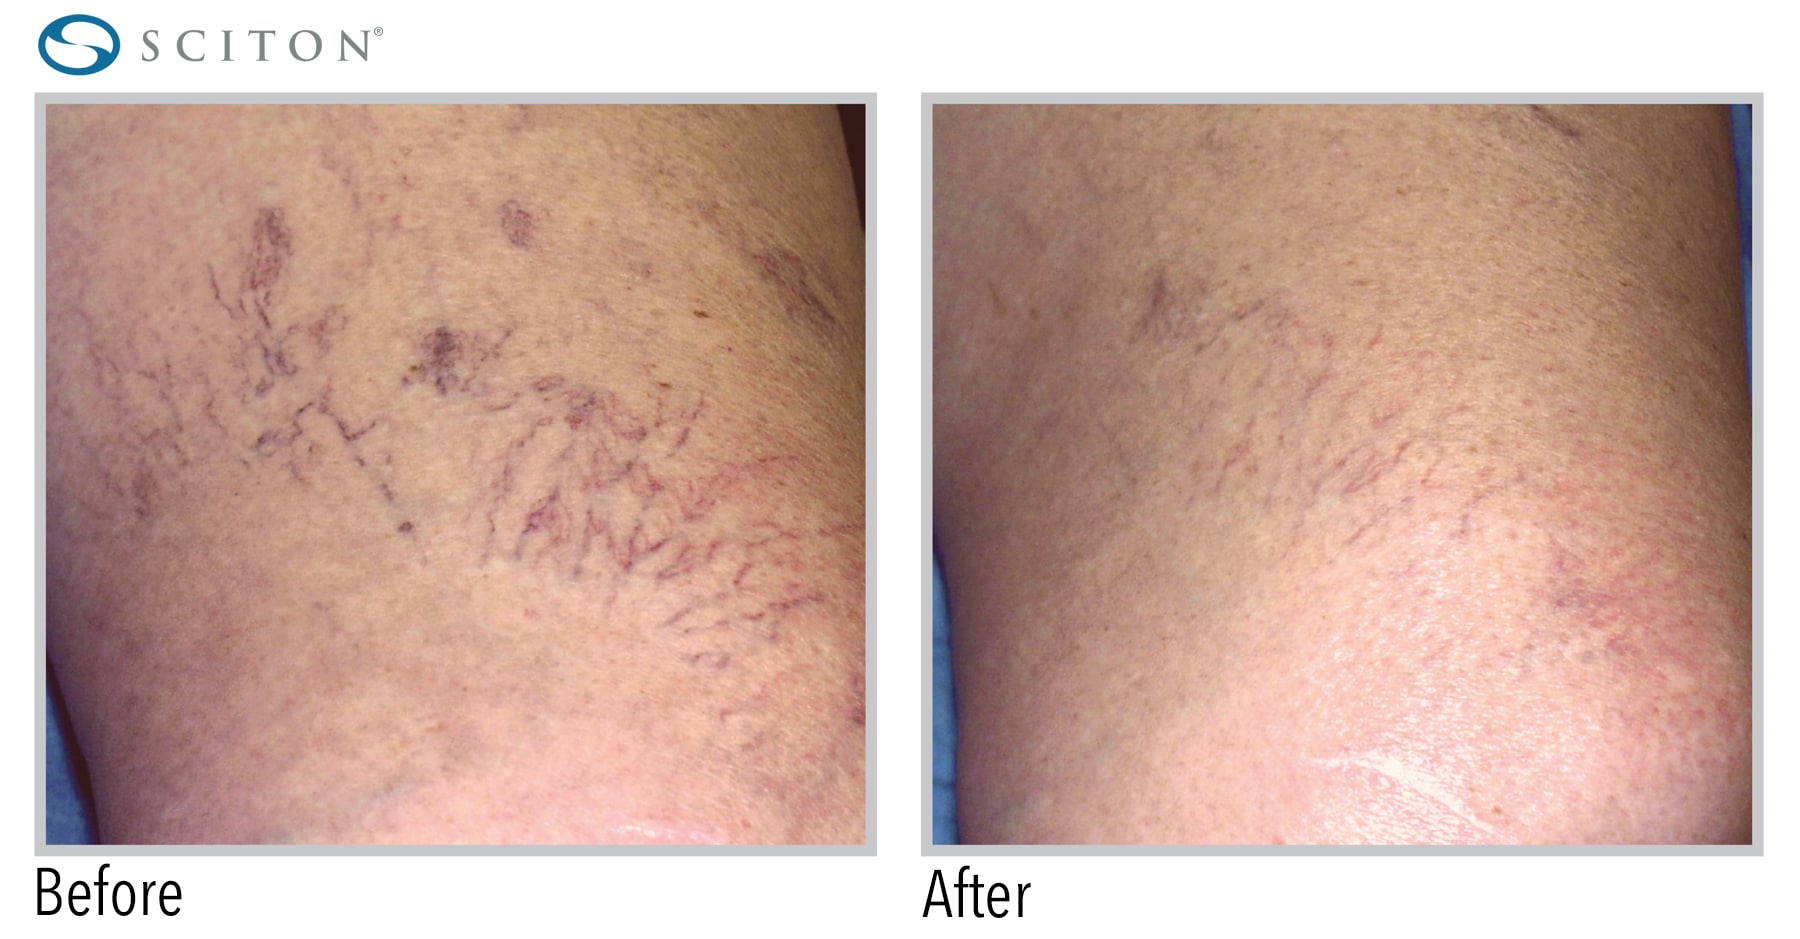 up close of veins on patient’s skin before and after laser treatment, faded afterwards